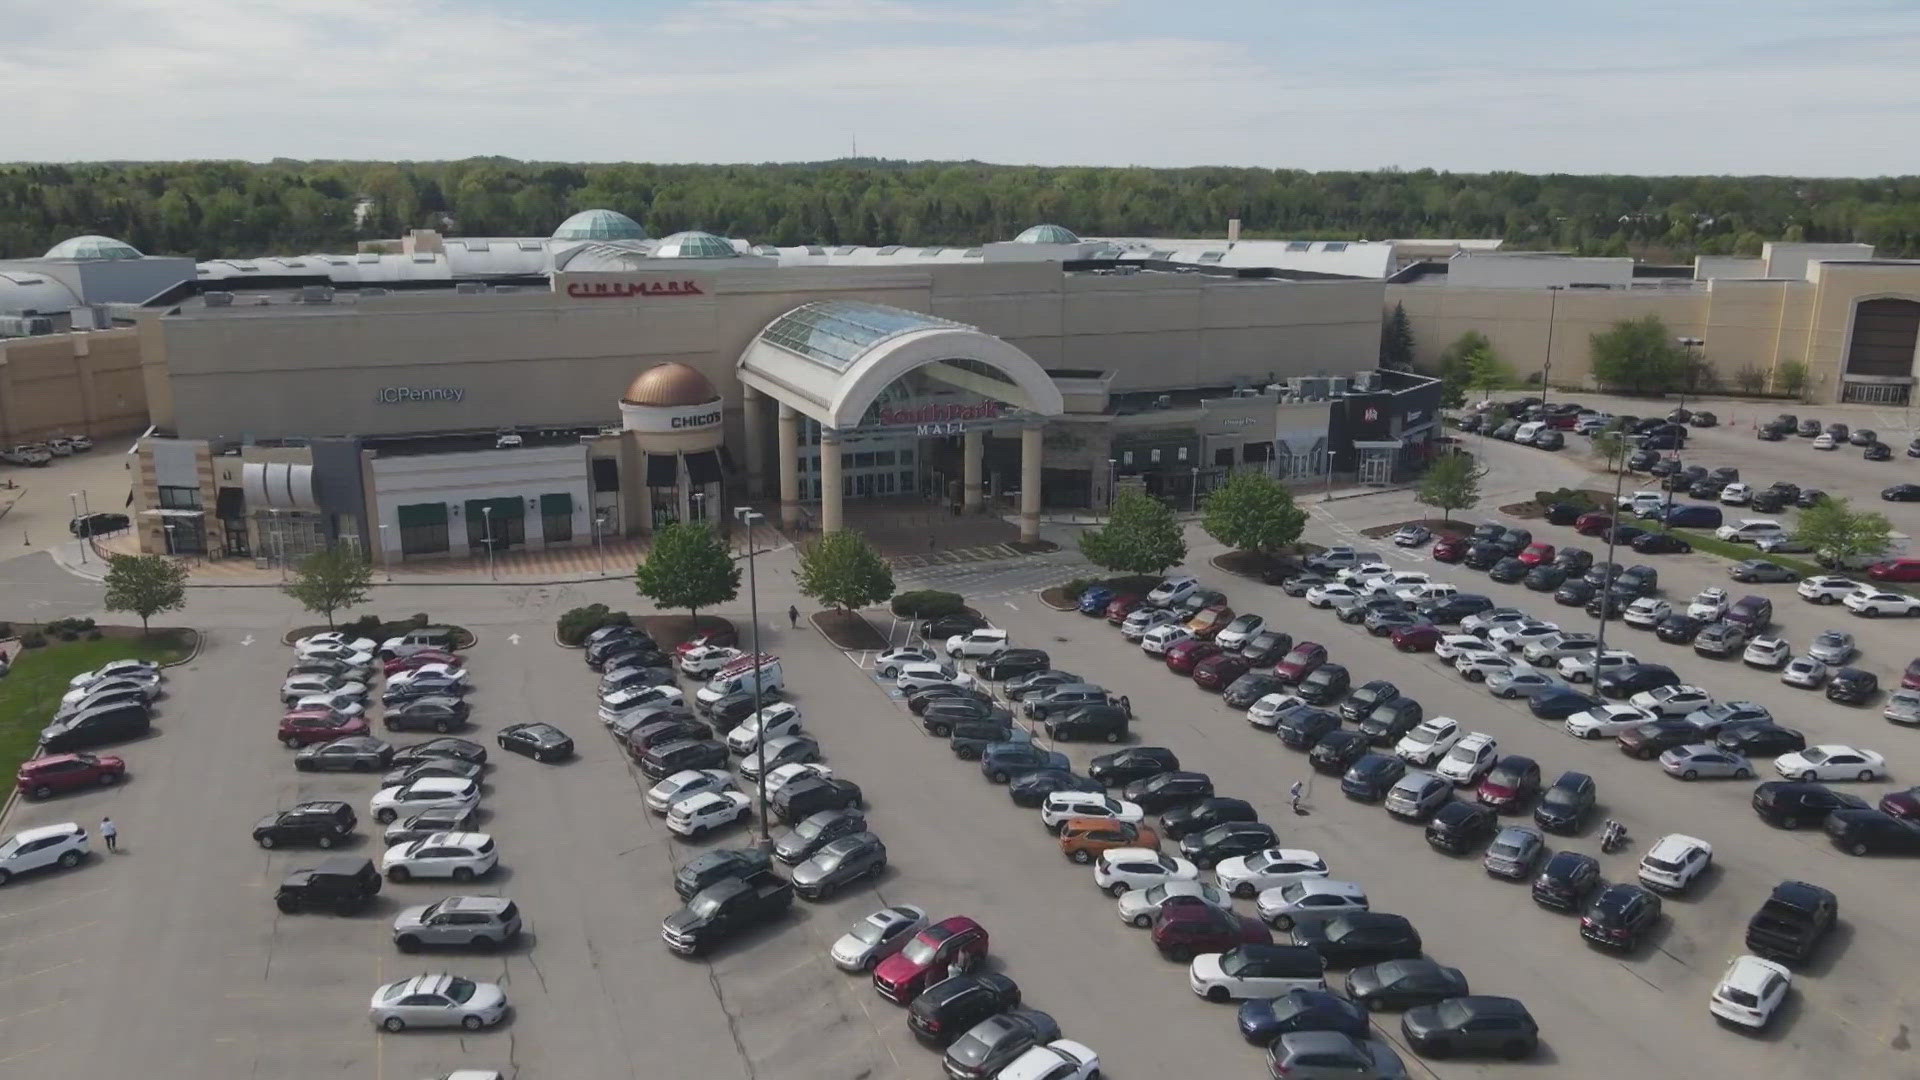 The city of Strongsville says it has a vested interest in the mall. The zoning changes would pave the way for a hotel, outdoor playing fields, and a fitness center.